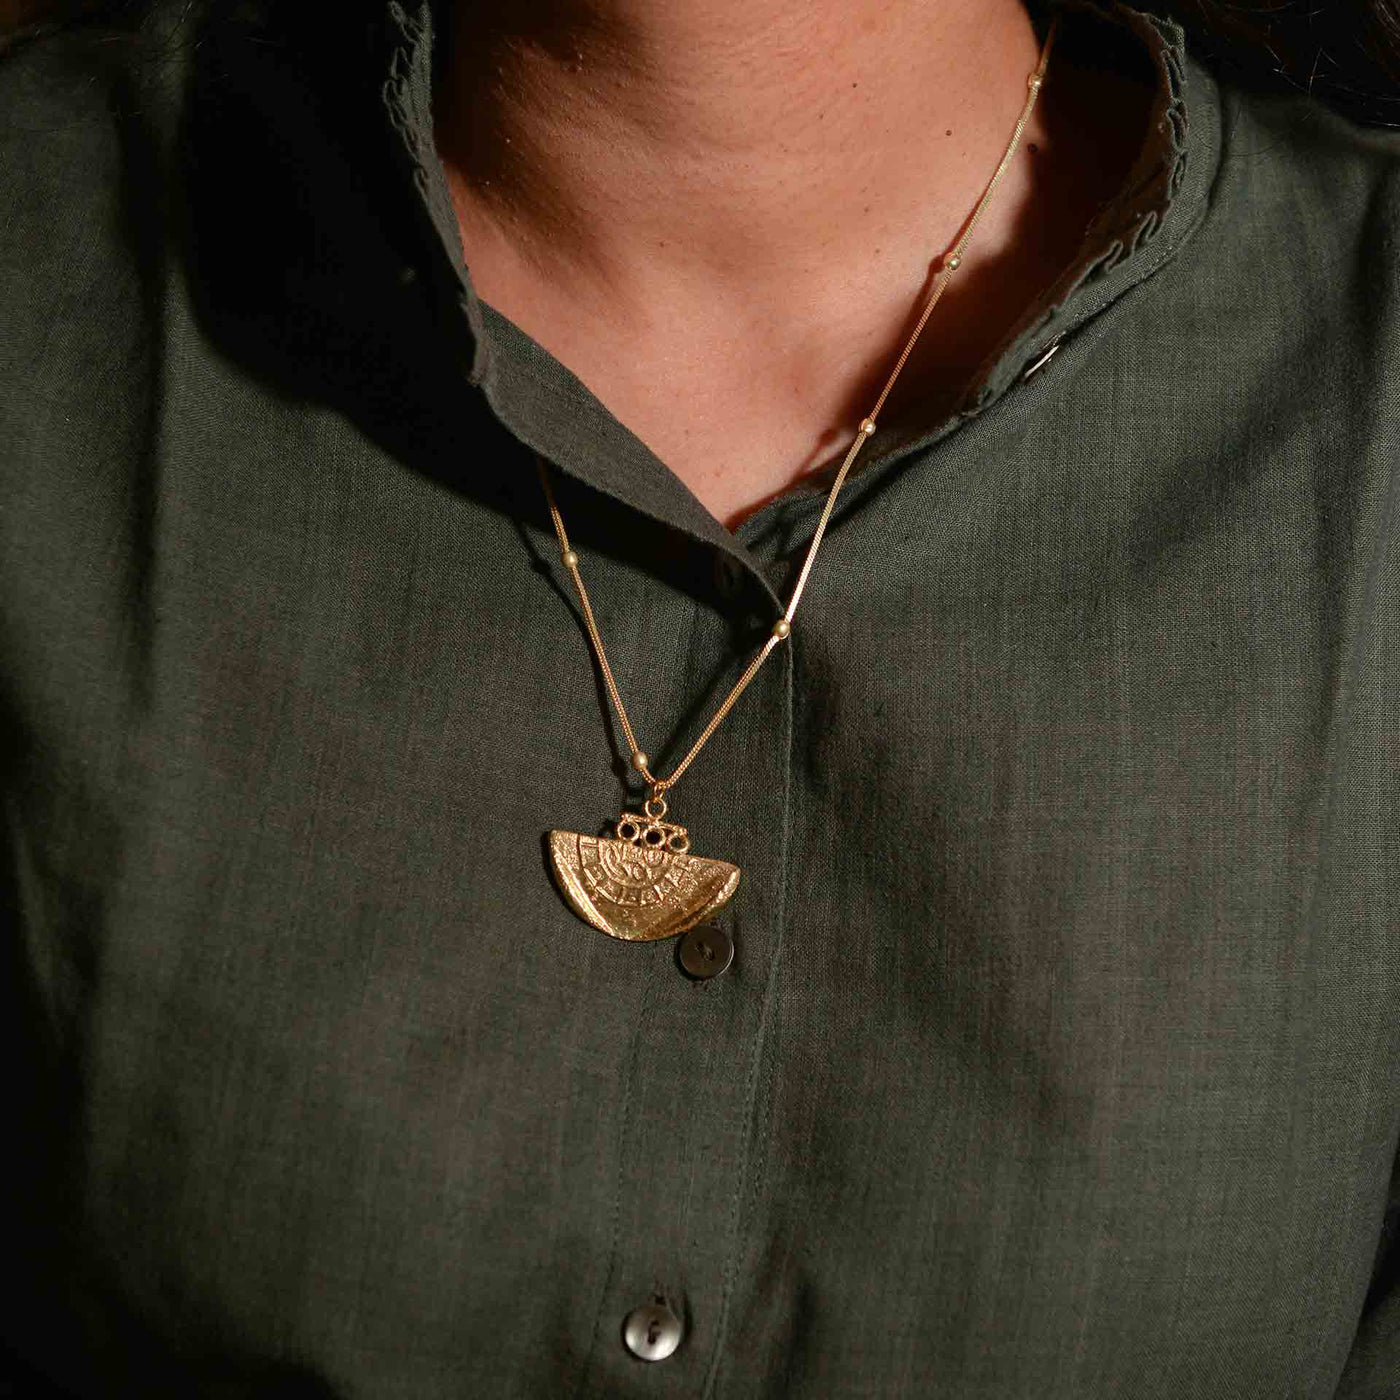 A dye gold pendant on a chain, which is made to resemble a fossil.